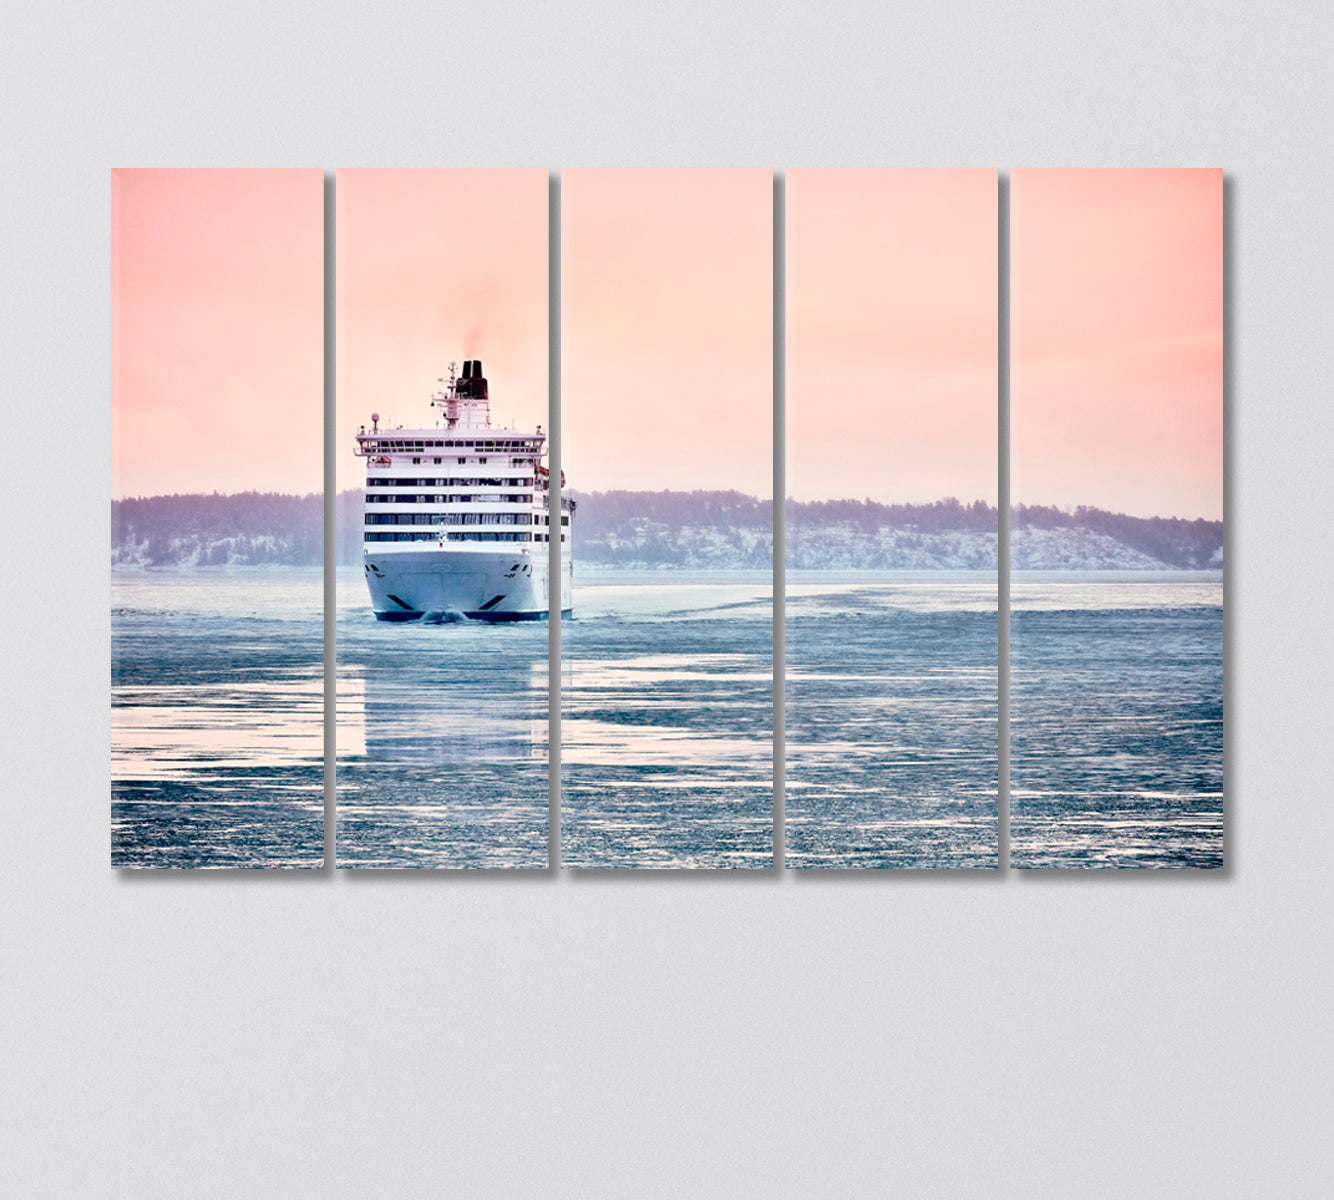 Big White Cruise Liner Ship in the Fjord of Norway Canvas Print-Canvas Print-CetArt-5 Panels-36x24 inches-CetArt